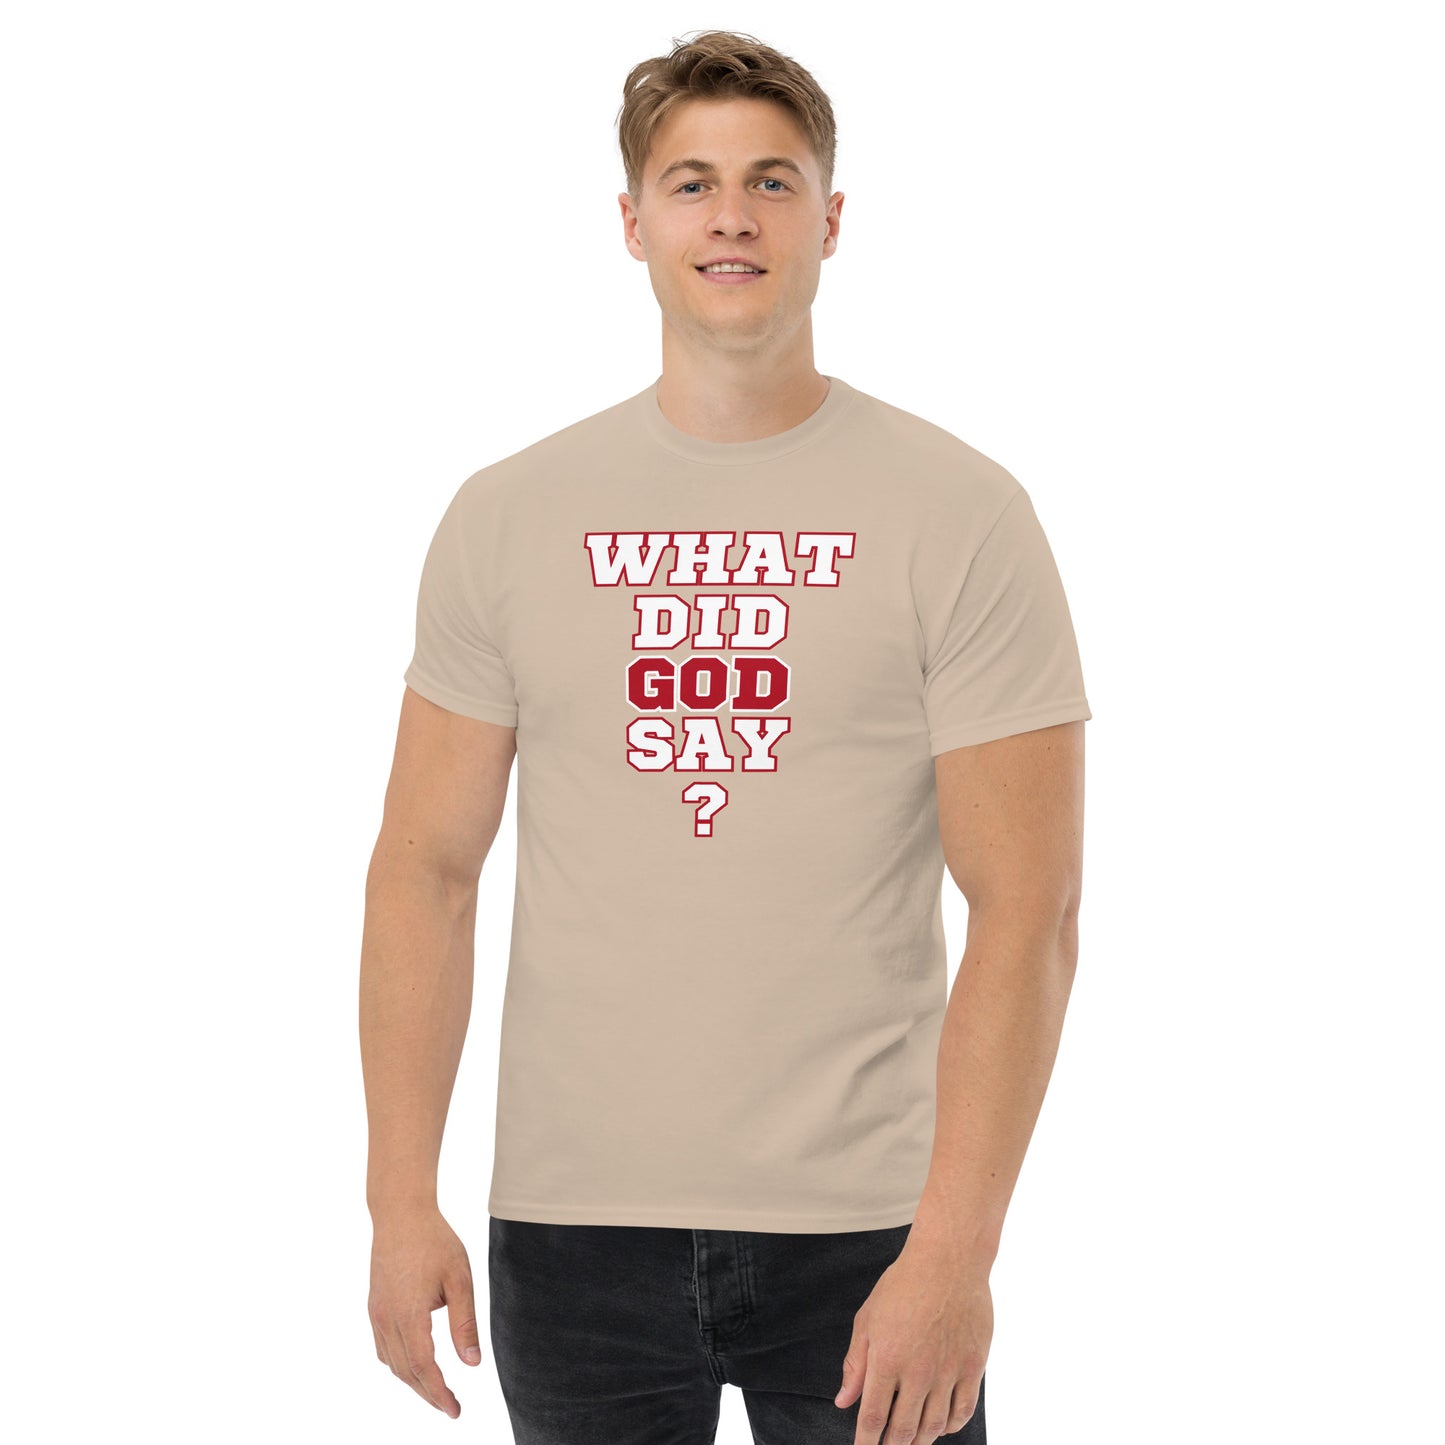 WHAT DID GOD SAY? Men's classic tee